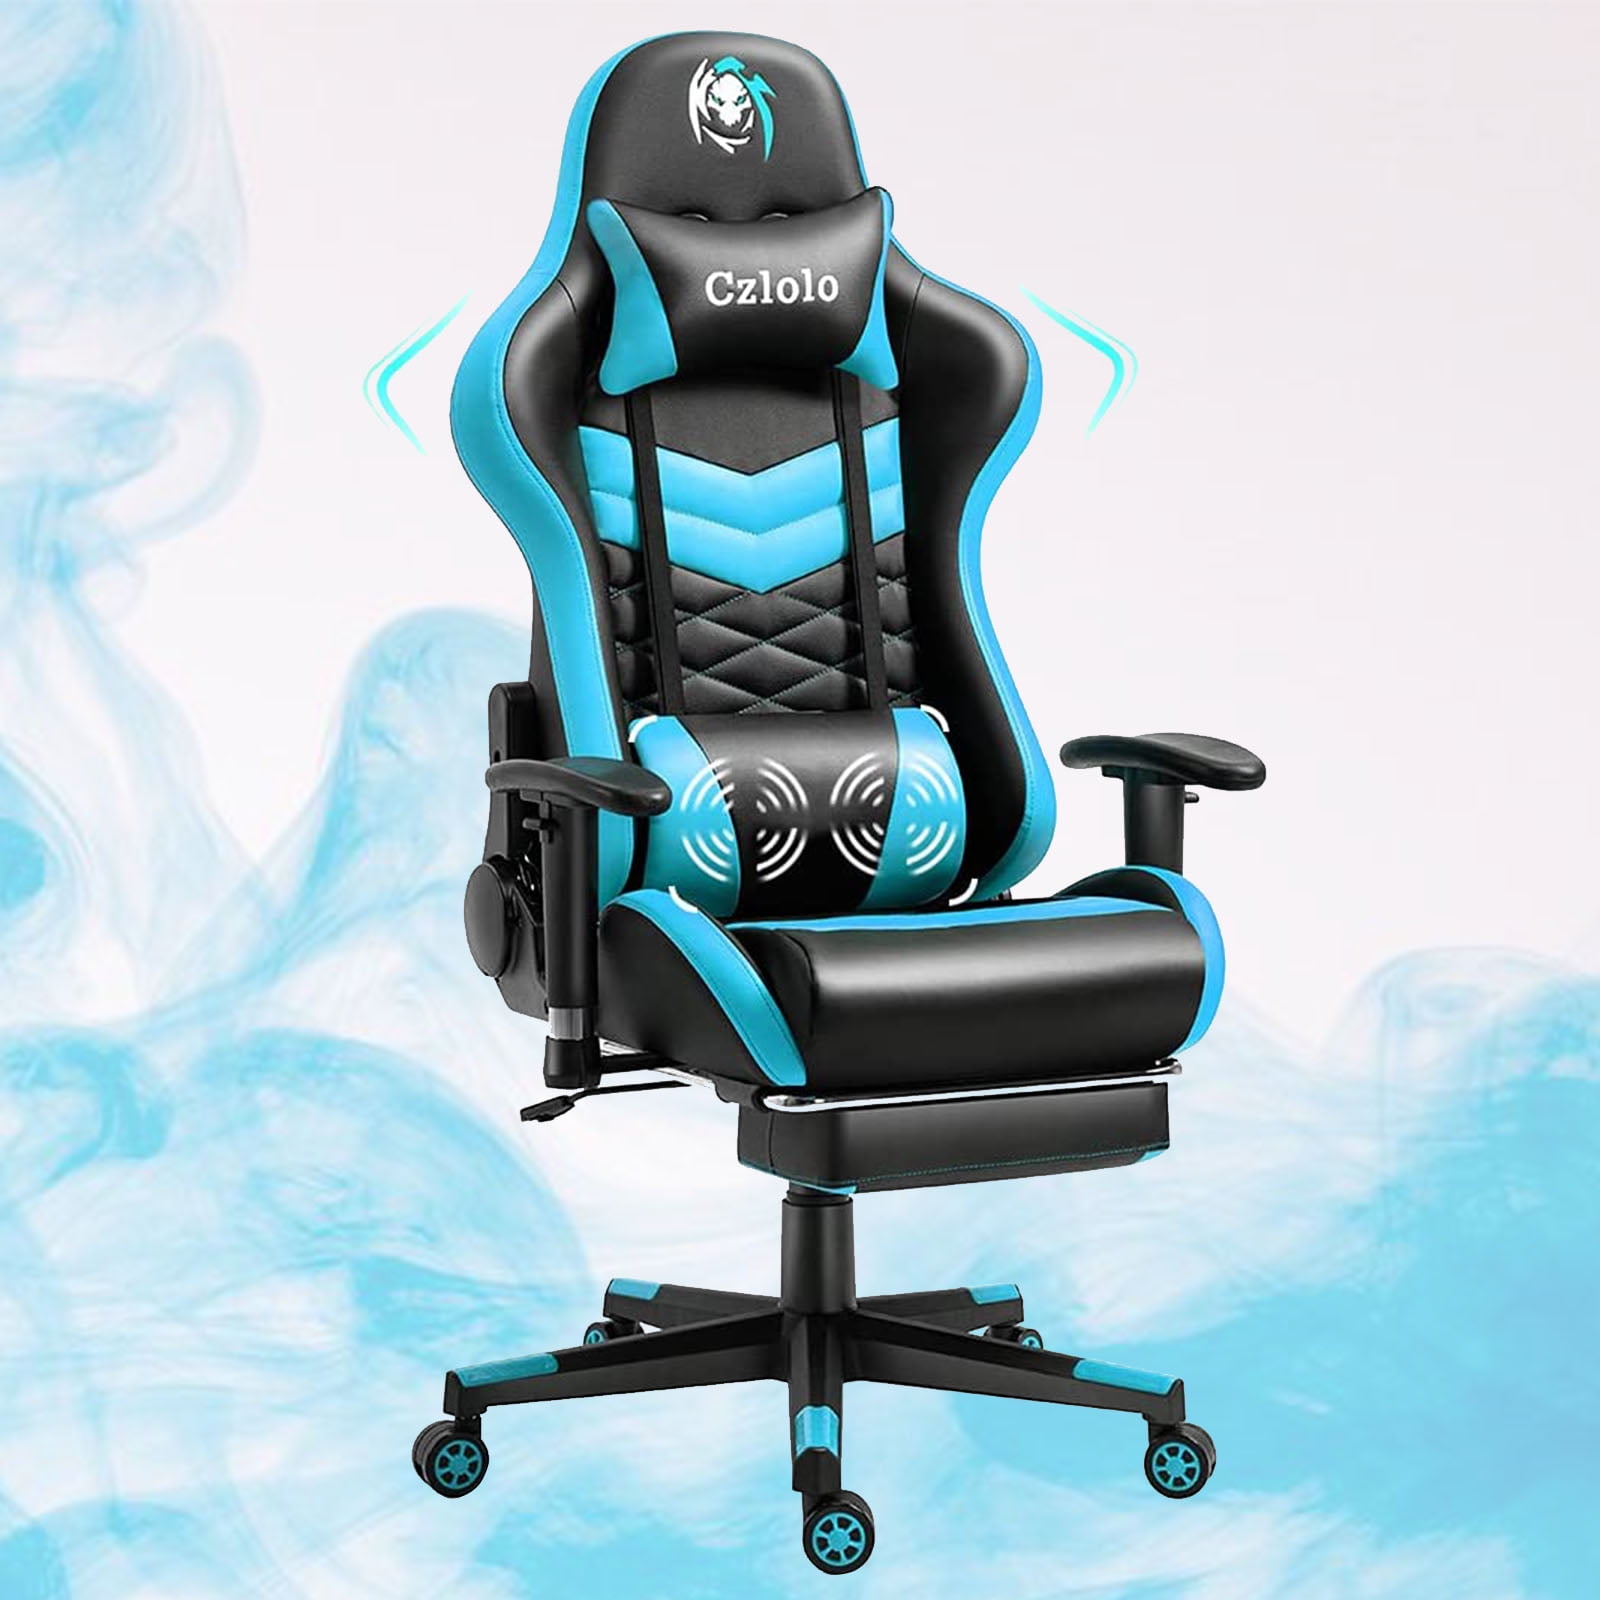 canal heroína Térmico Czlolo Gaming Chair With Footrest and Massage, PU Leather Racing Style  Ergonomic Silla Gamer PC Computer Chair, Cheap Big and Tall Reclining  Office Desk Chair for Adults/Teens/Heavy People, Teal+Black - Walmart.com